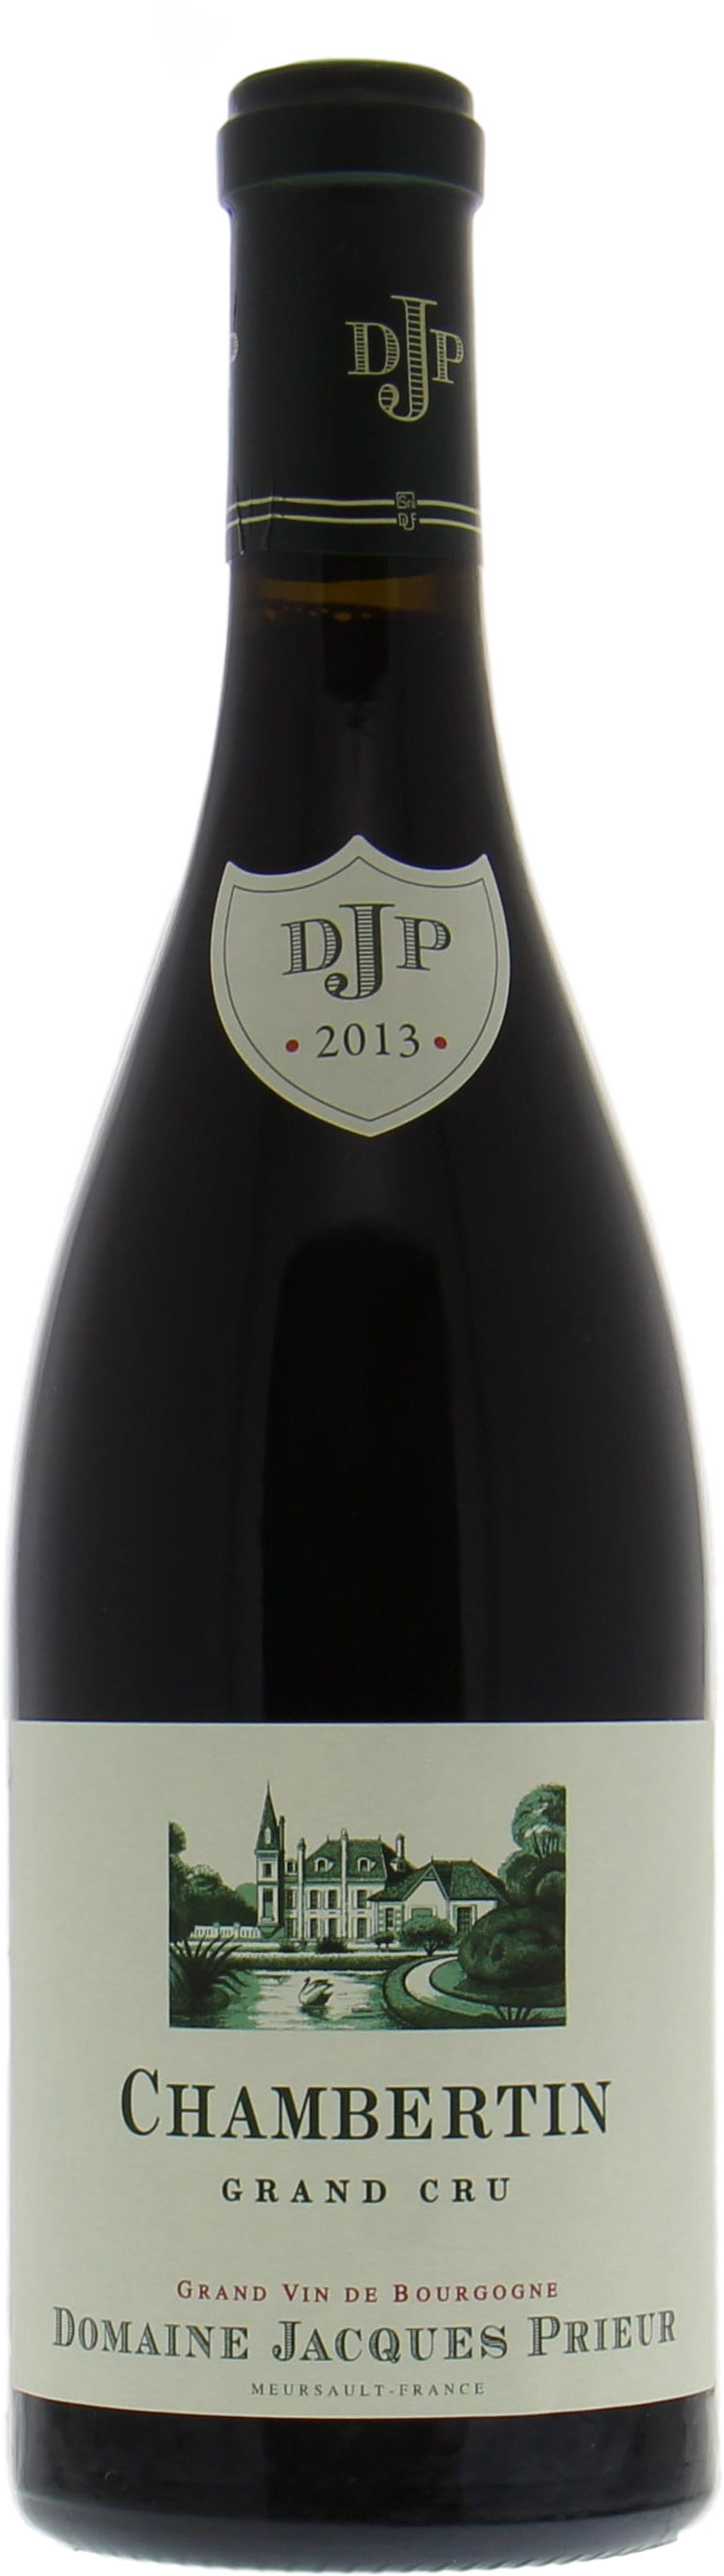 Domaine Jacques Prieur - Chambertin 2013 Perfect